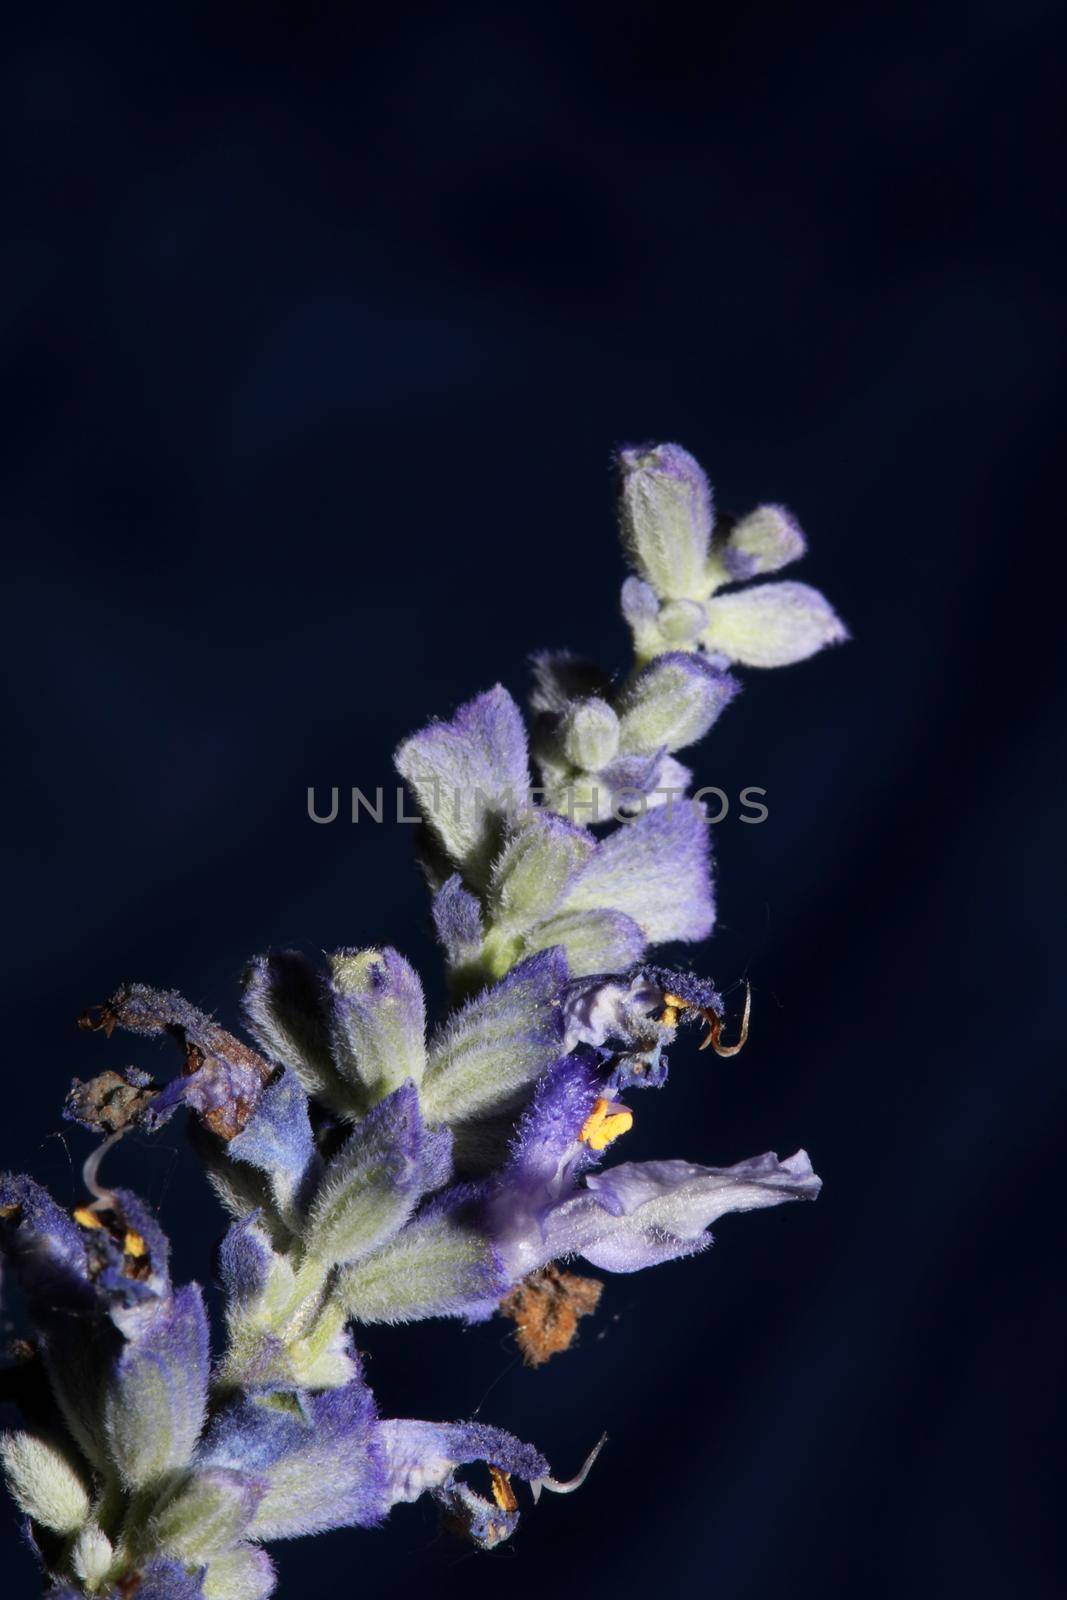 Flower blossom salvia divinorum family lamiaceae close up botanical background high quality big size print home decor agricultural psychoactive flowers by BakalaeroZz